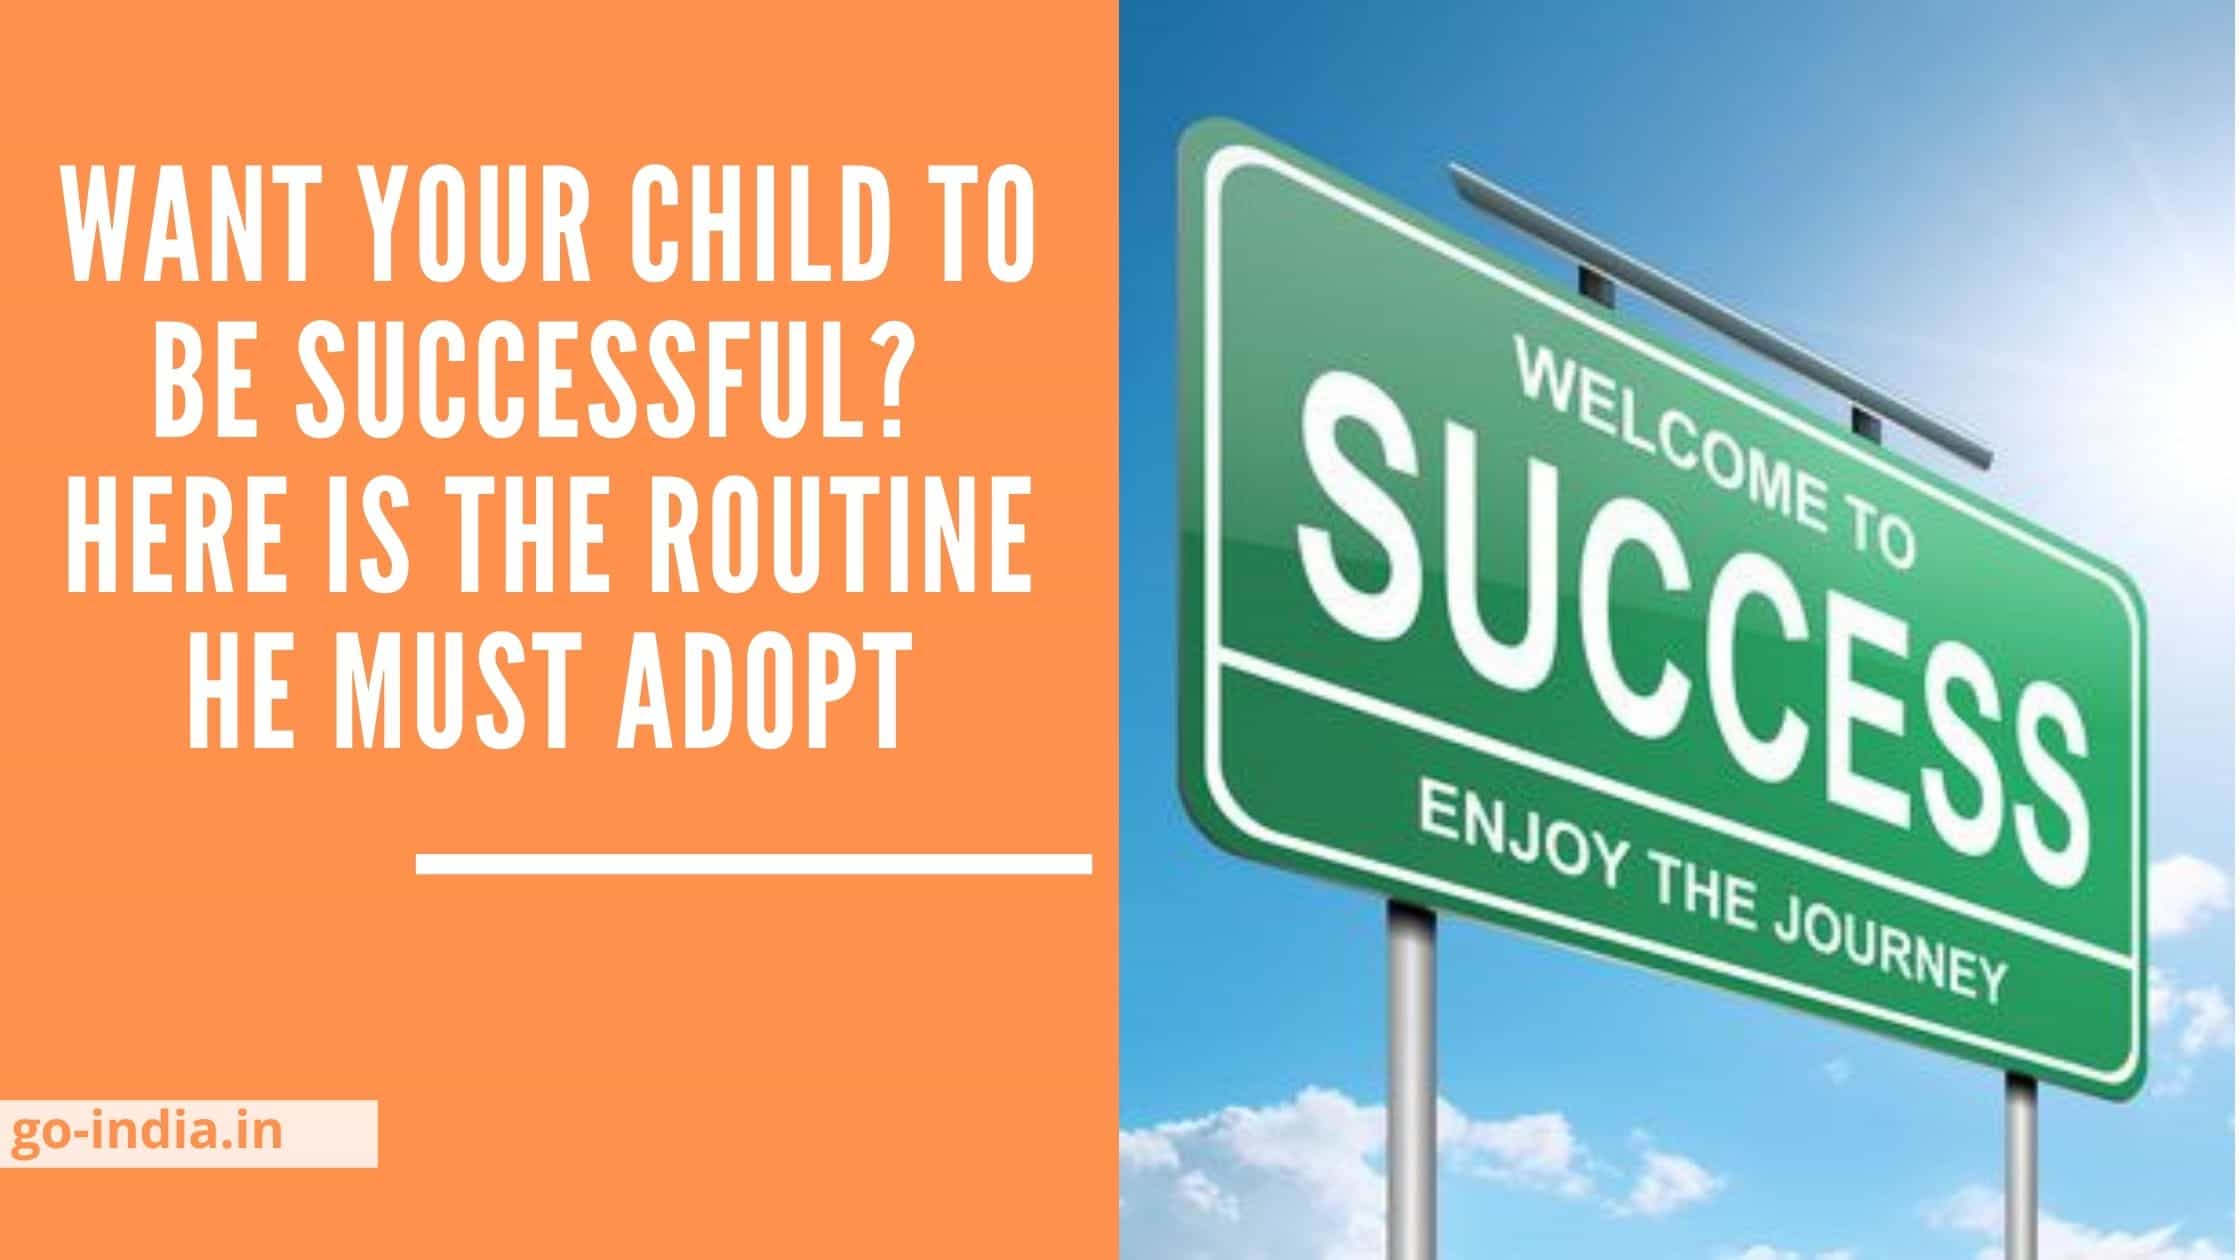 Want your child to be successful? Here is the routine he must adopt